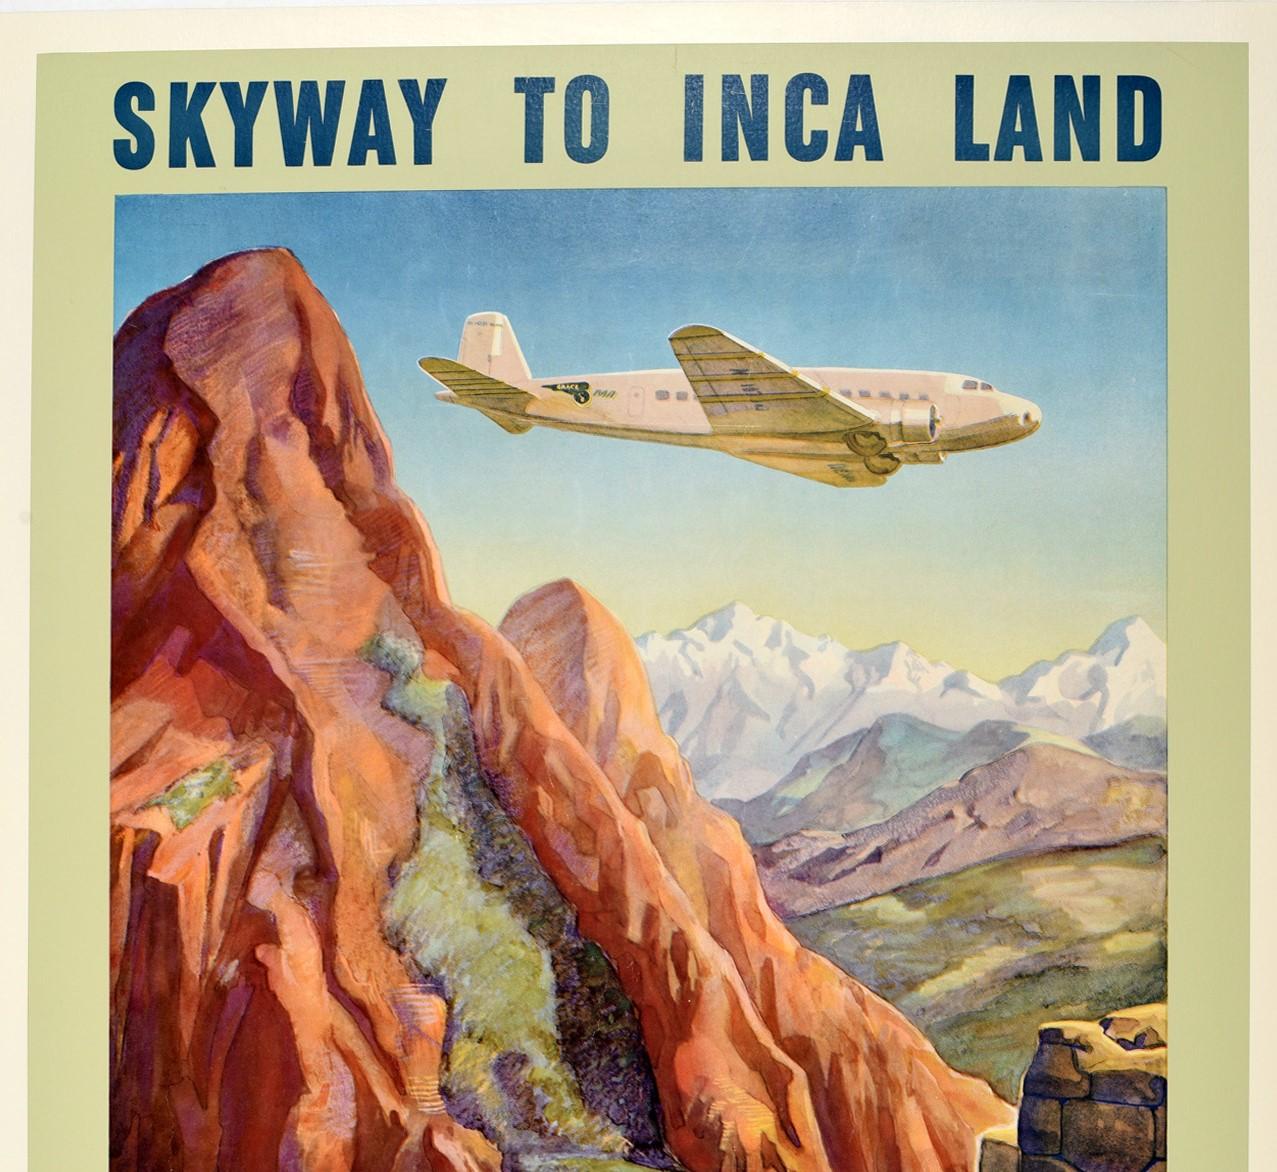 Original vintage PanAm travel poster - Skyway to Inca Land It's a Small World by Pan American Airways - featuring a great design depicting people in colorful clothing standing at Macchu Picchu with their llamas and watching a Pan Am plane fly over